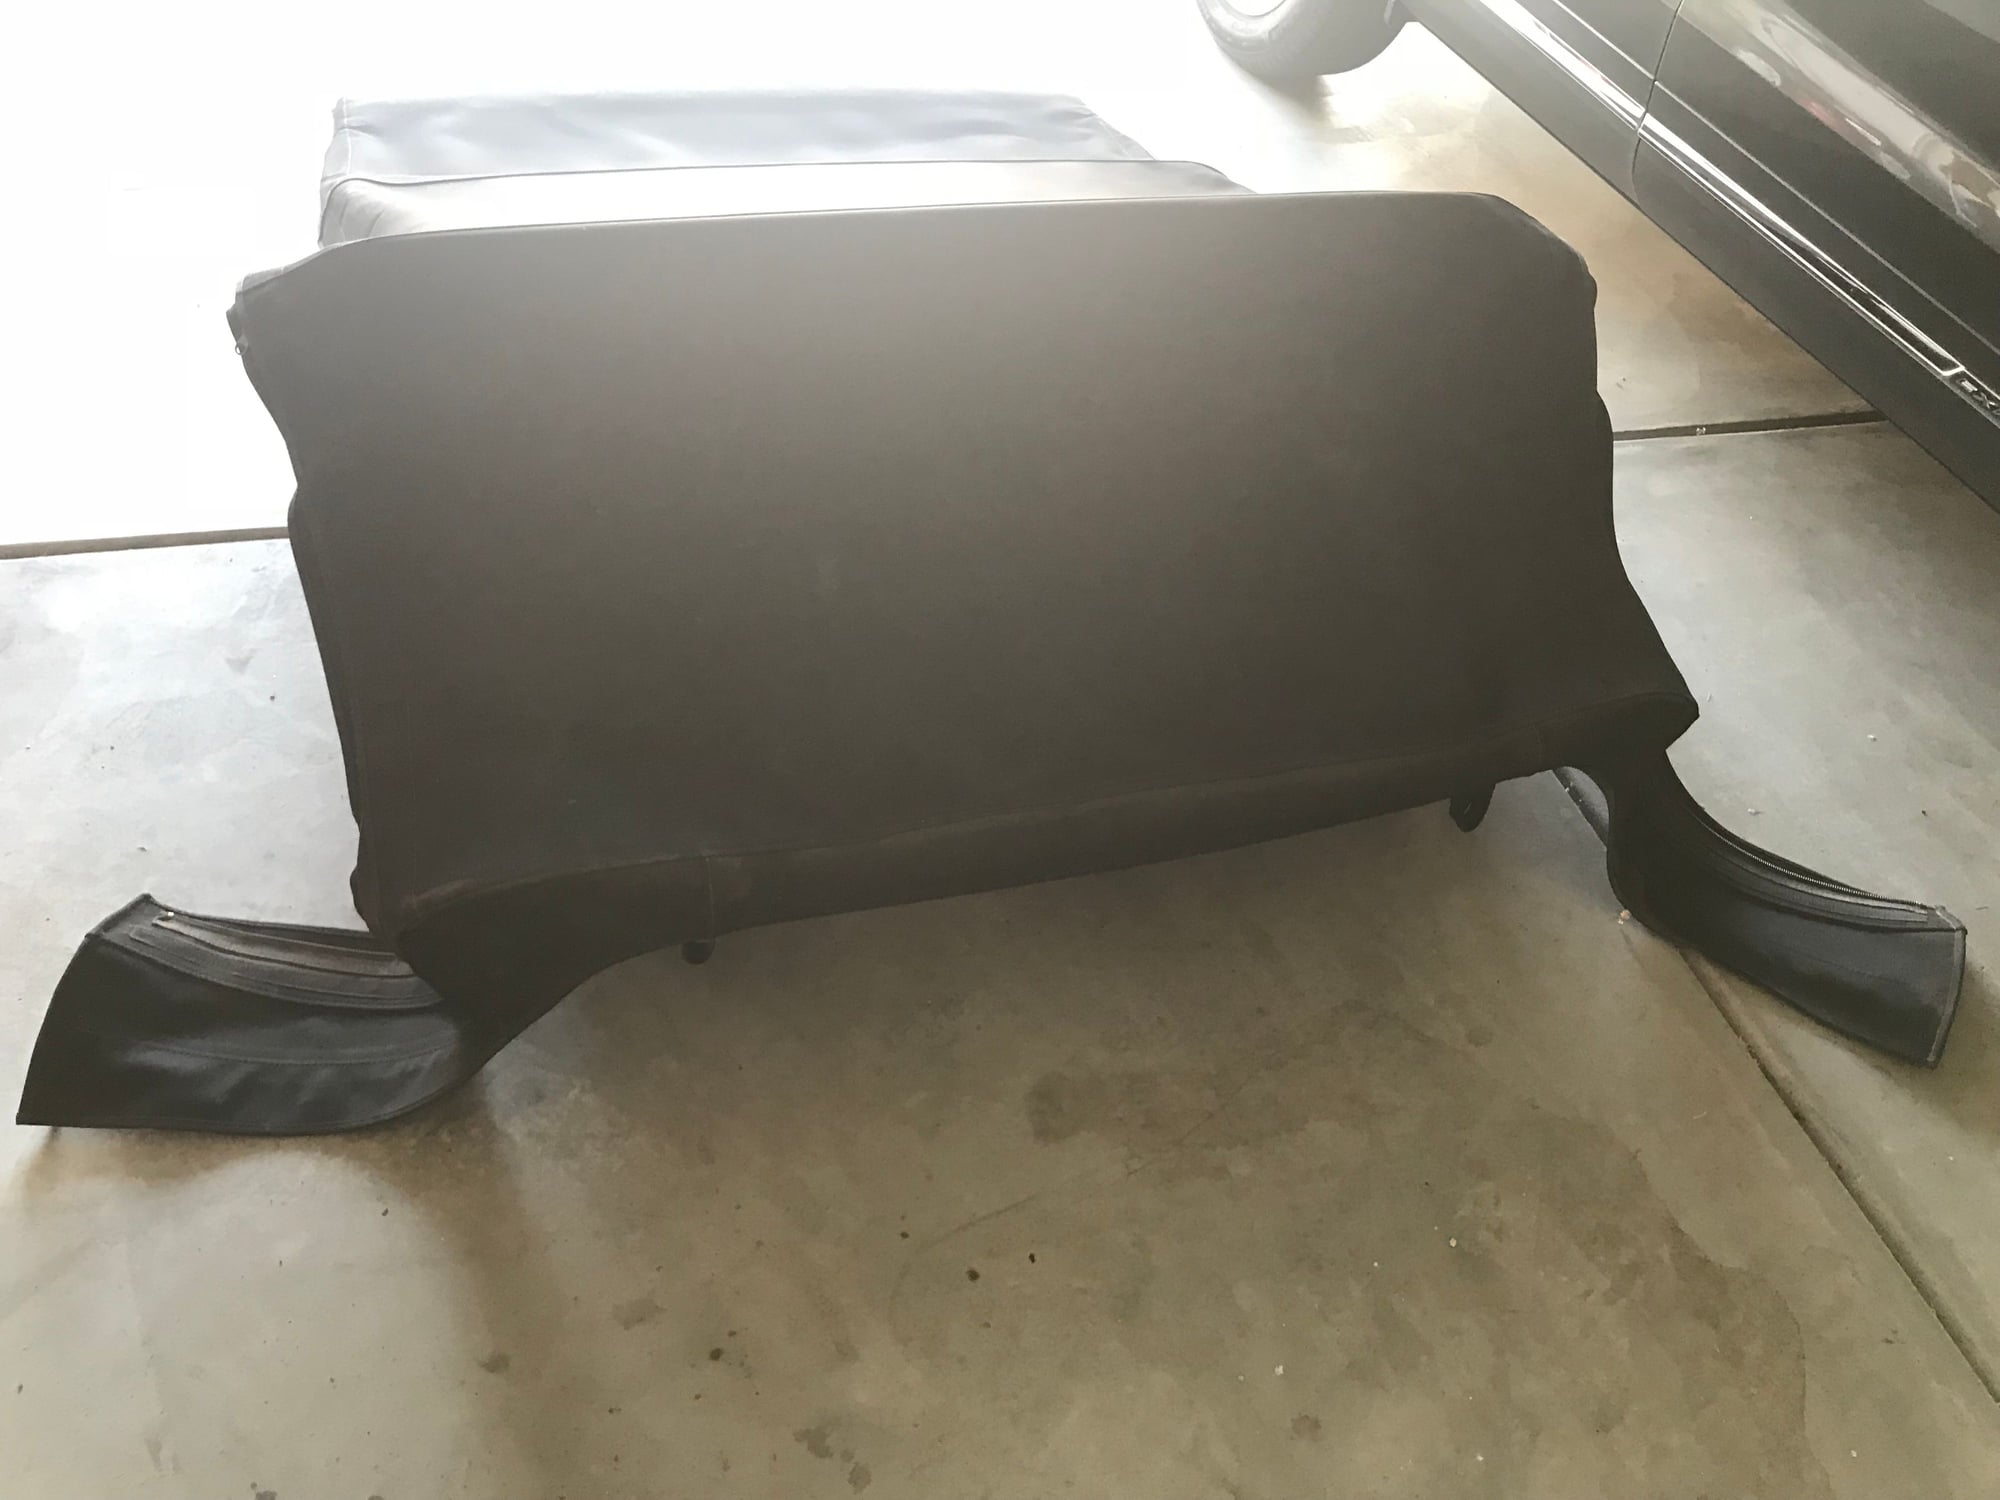 Exterior Body Parts - Complete 4dr Soft Top - Used - 2016 to 2018 Jeep Wrangler - Menifee, CA 92584, United States